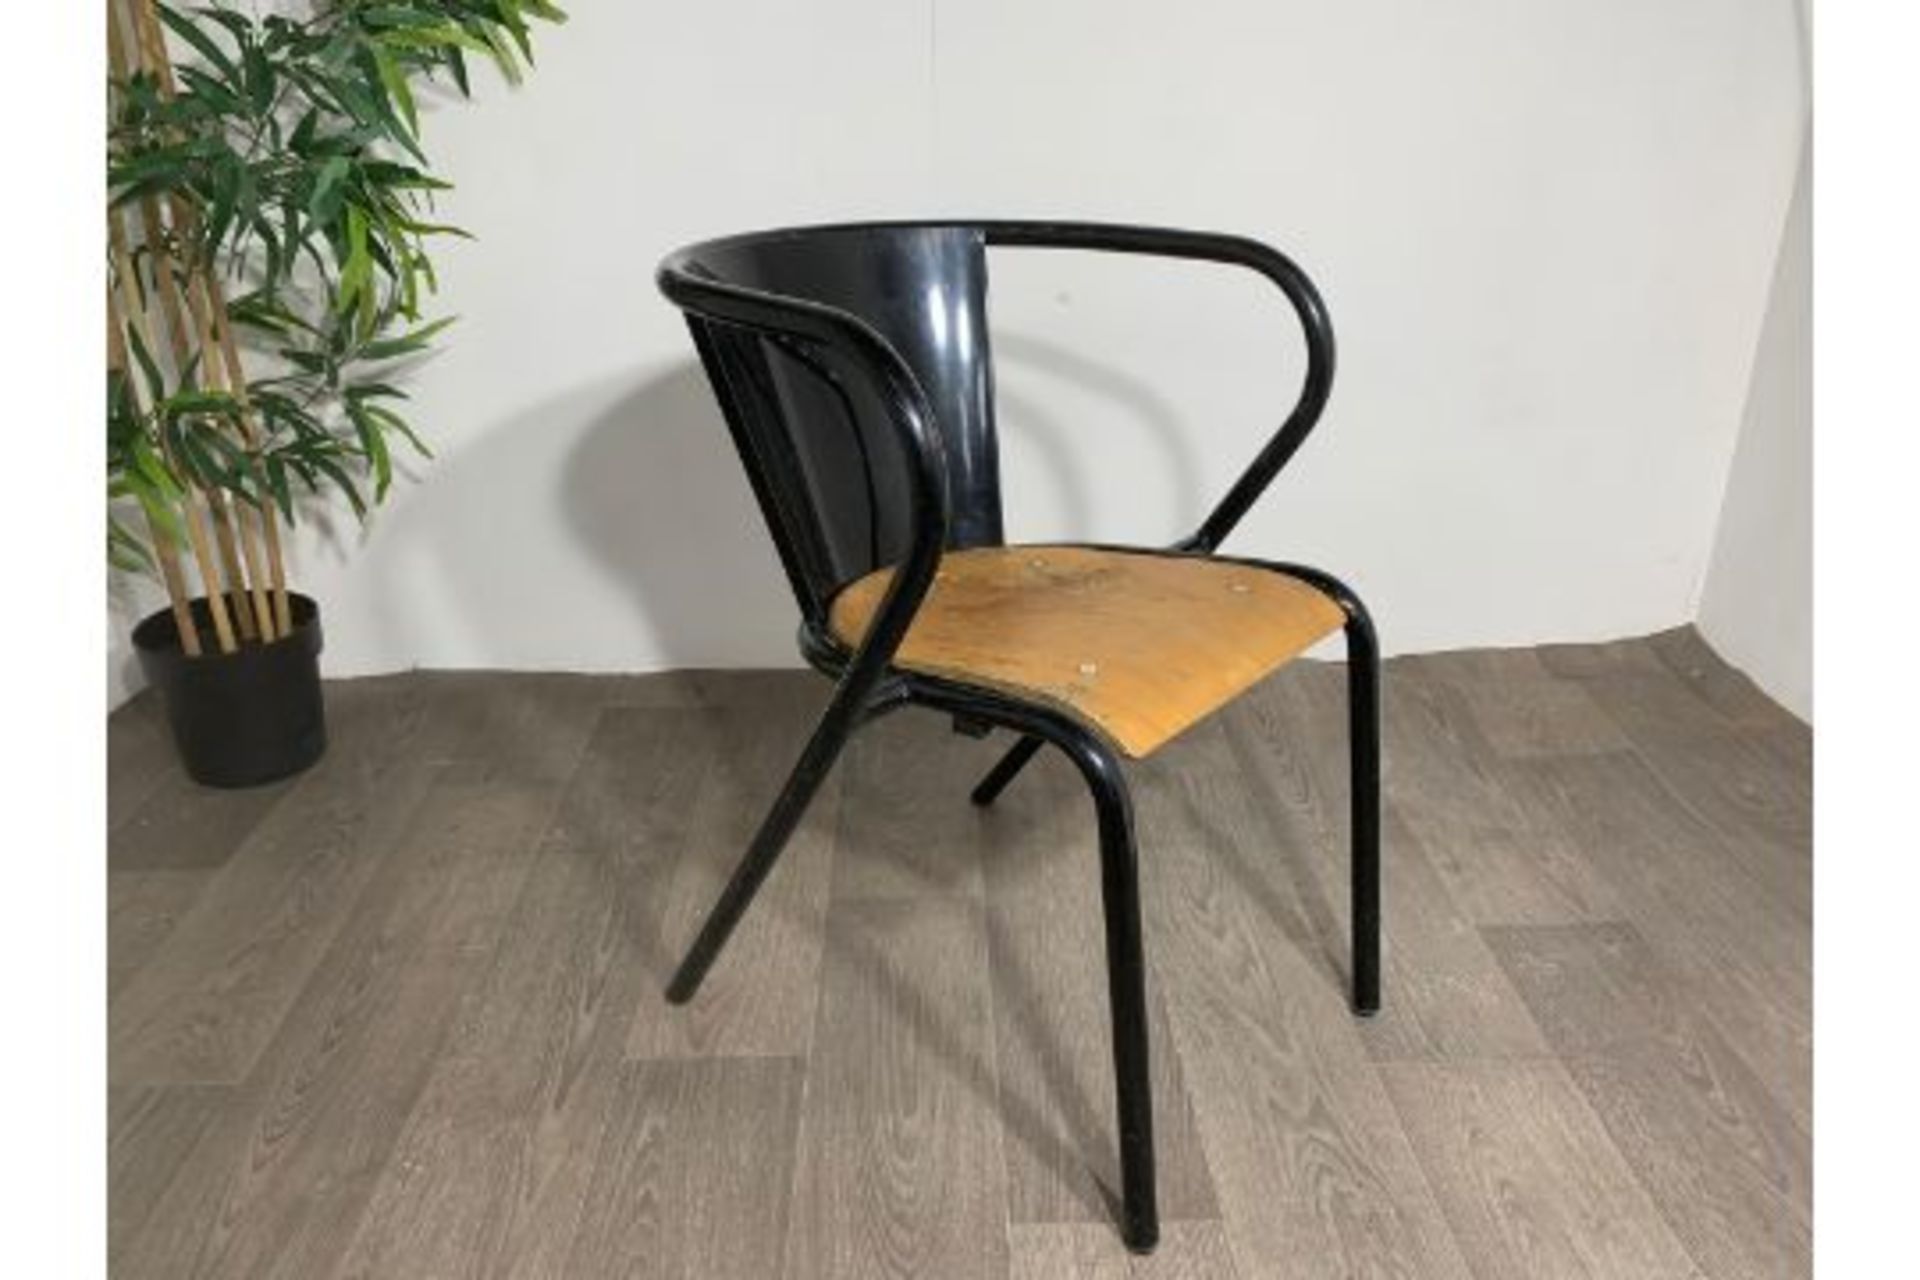 Adico 5008 Black Chair With Wooden Seat x2 - Image 2 of 8